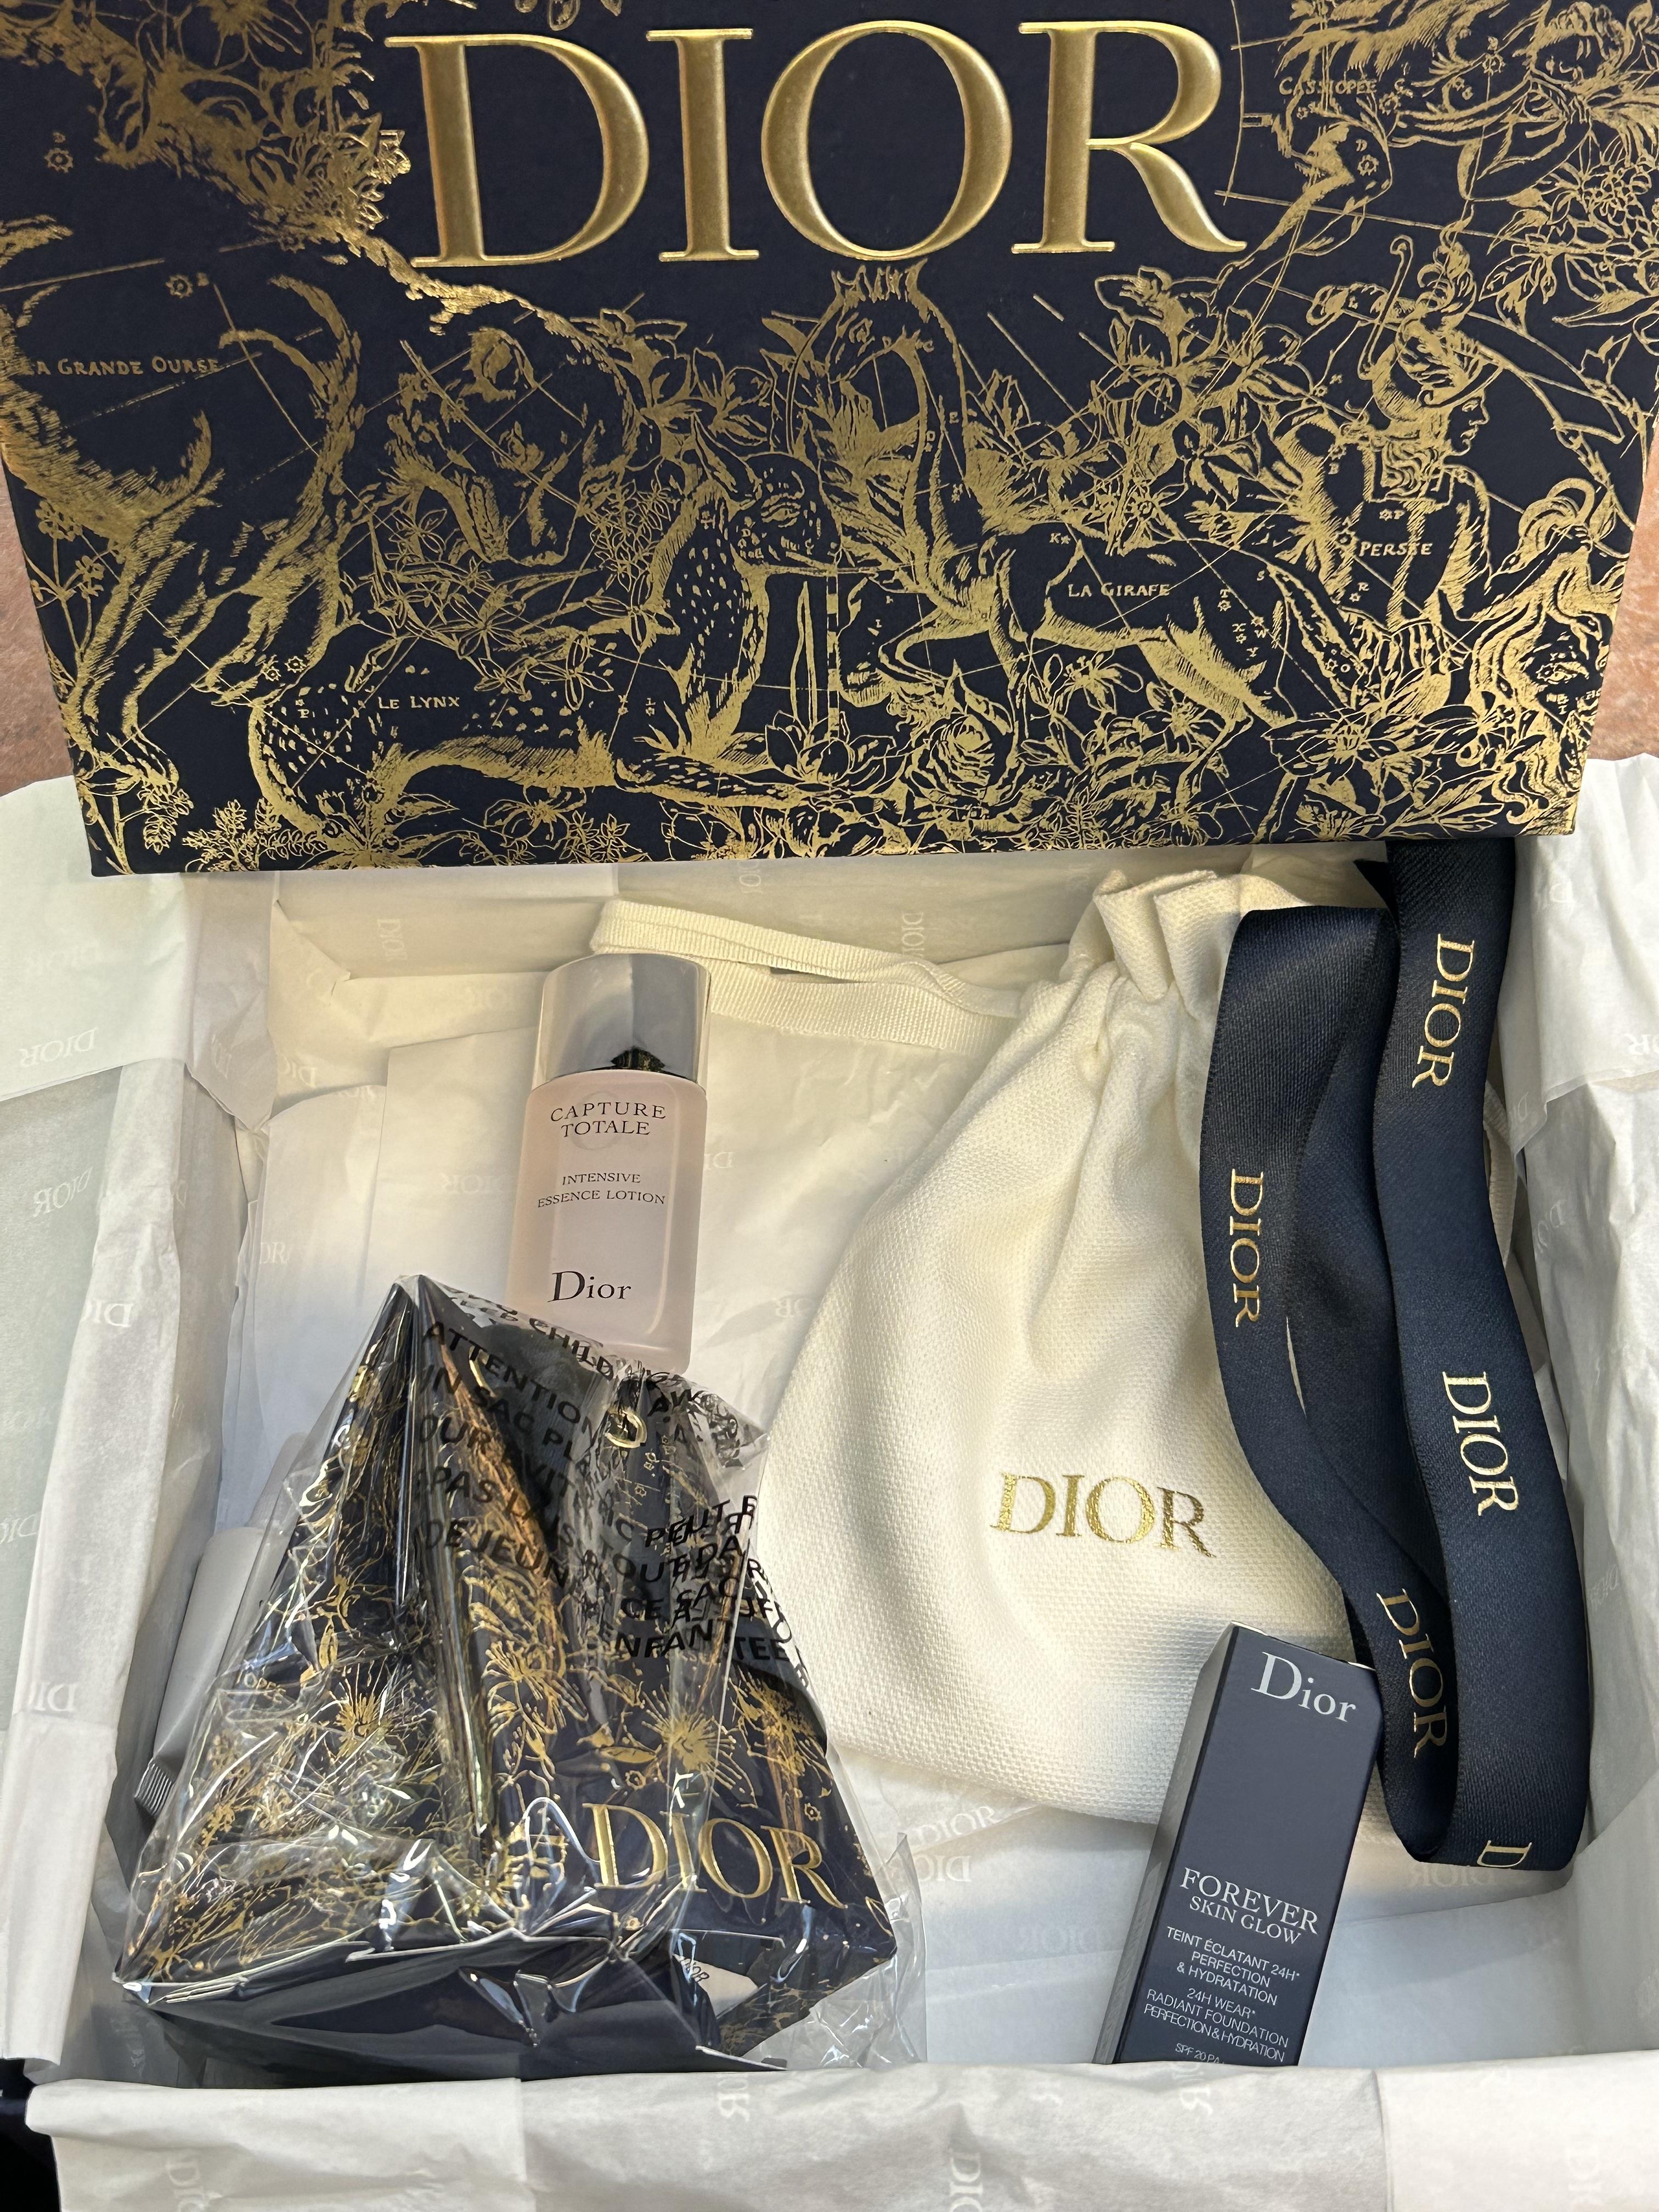 Dior box & products